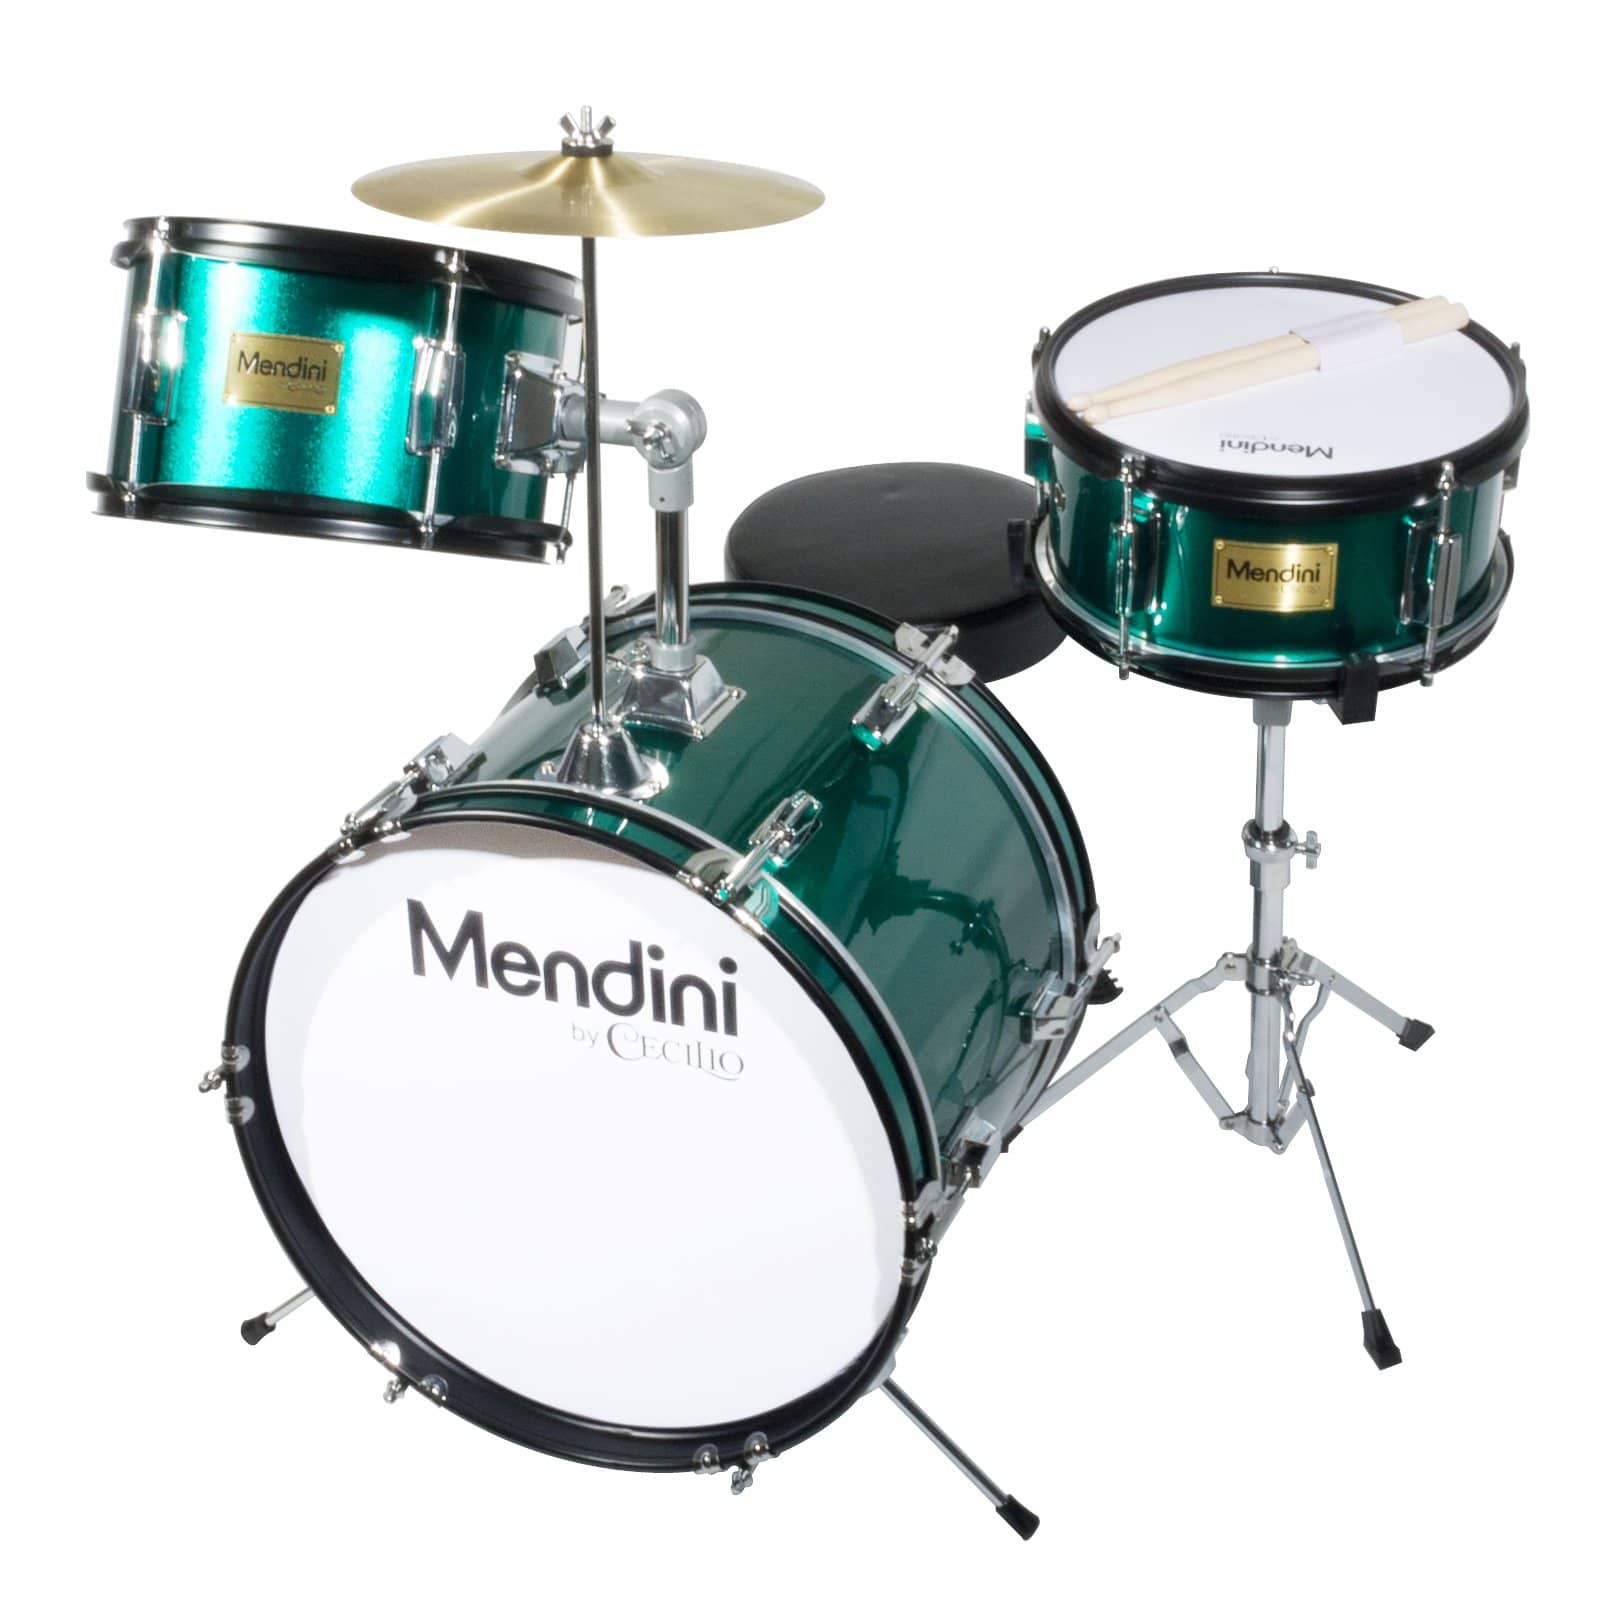 Mendini by Cecilio 16 inch 3-Piece Kids/Junior Drum Set with Adjustable Throne, Cymbal, Pedal & Drumsticks, Metallic Green, MJDS-3-GN 7